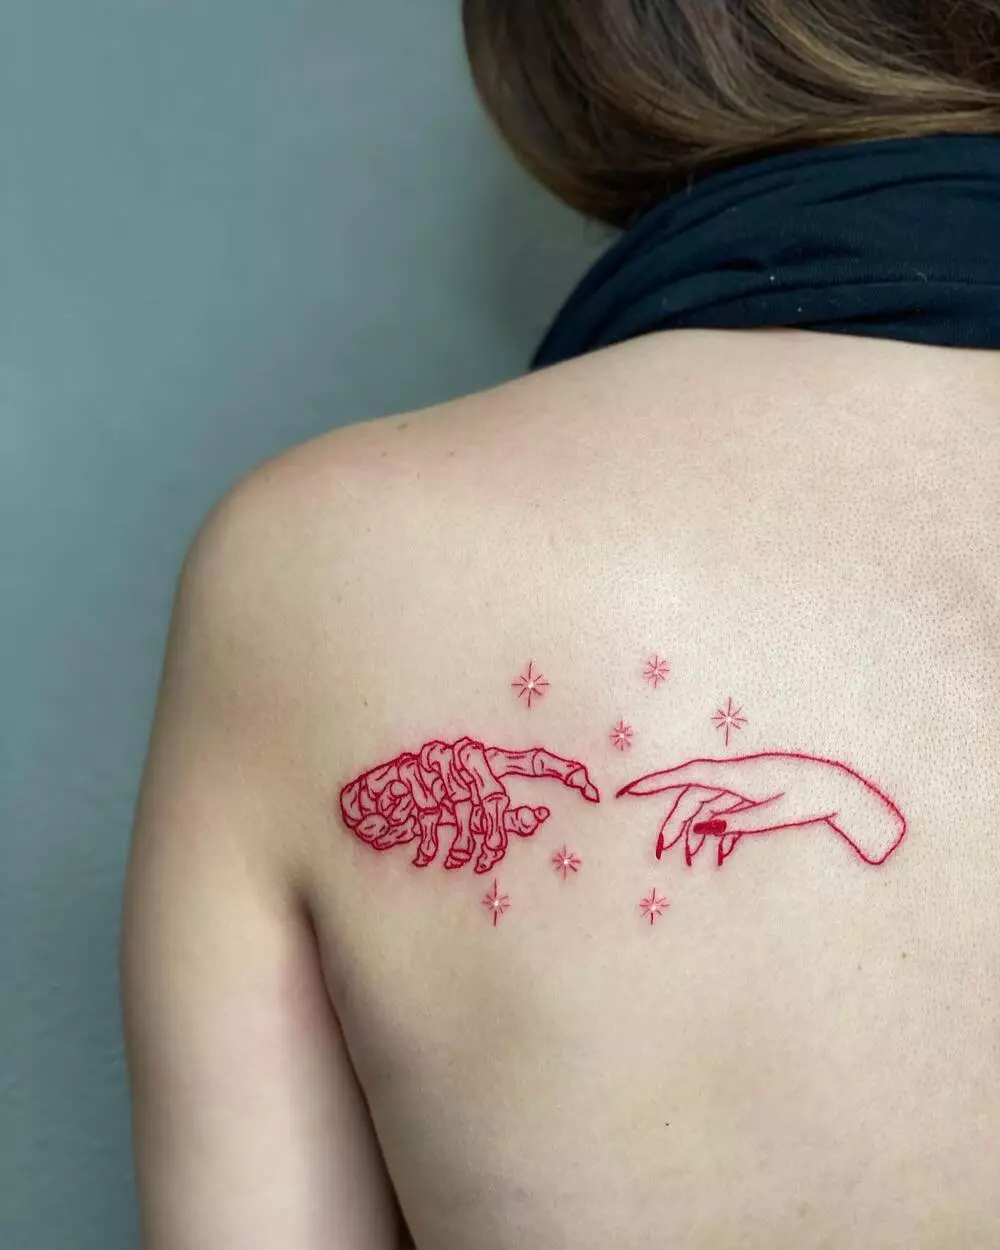 A Close-up Image of Red Ink Skeleton and Human Hands Tattoo